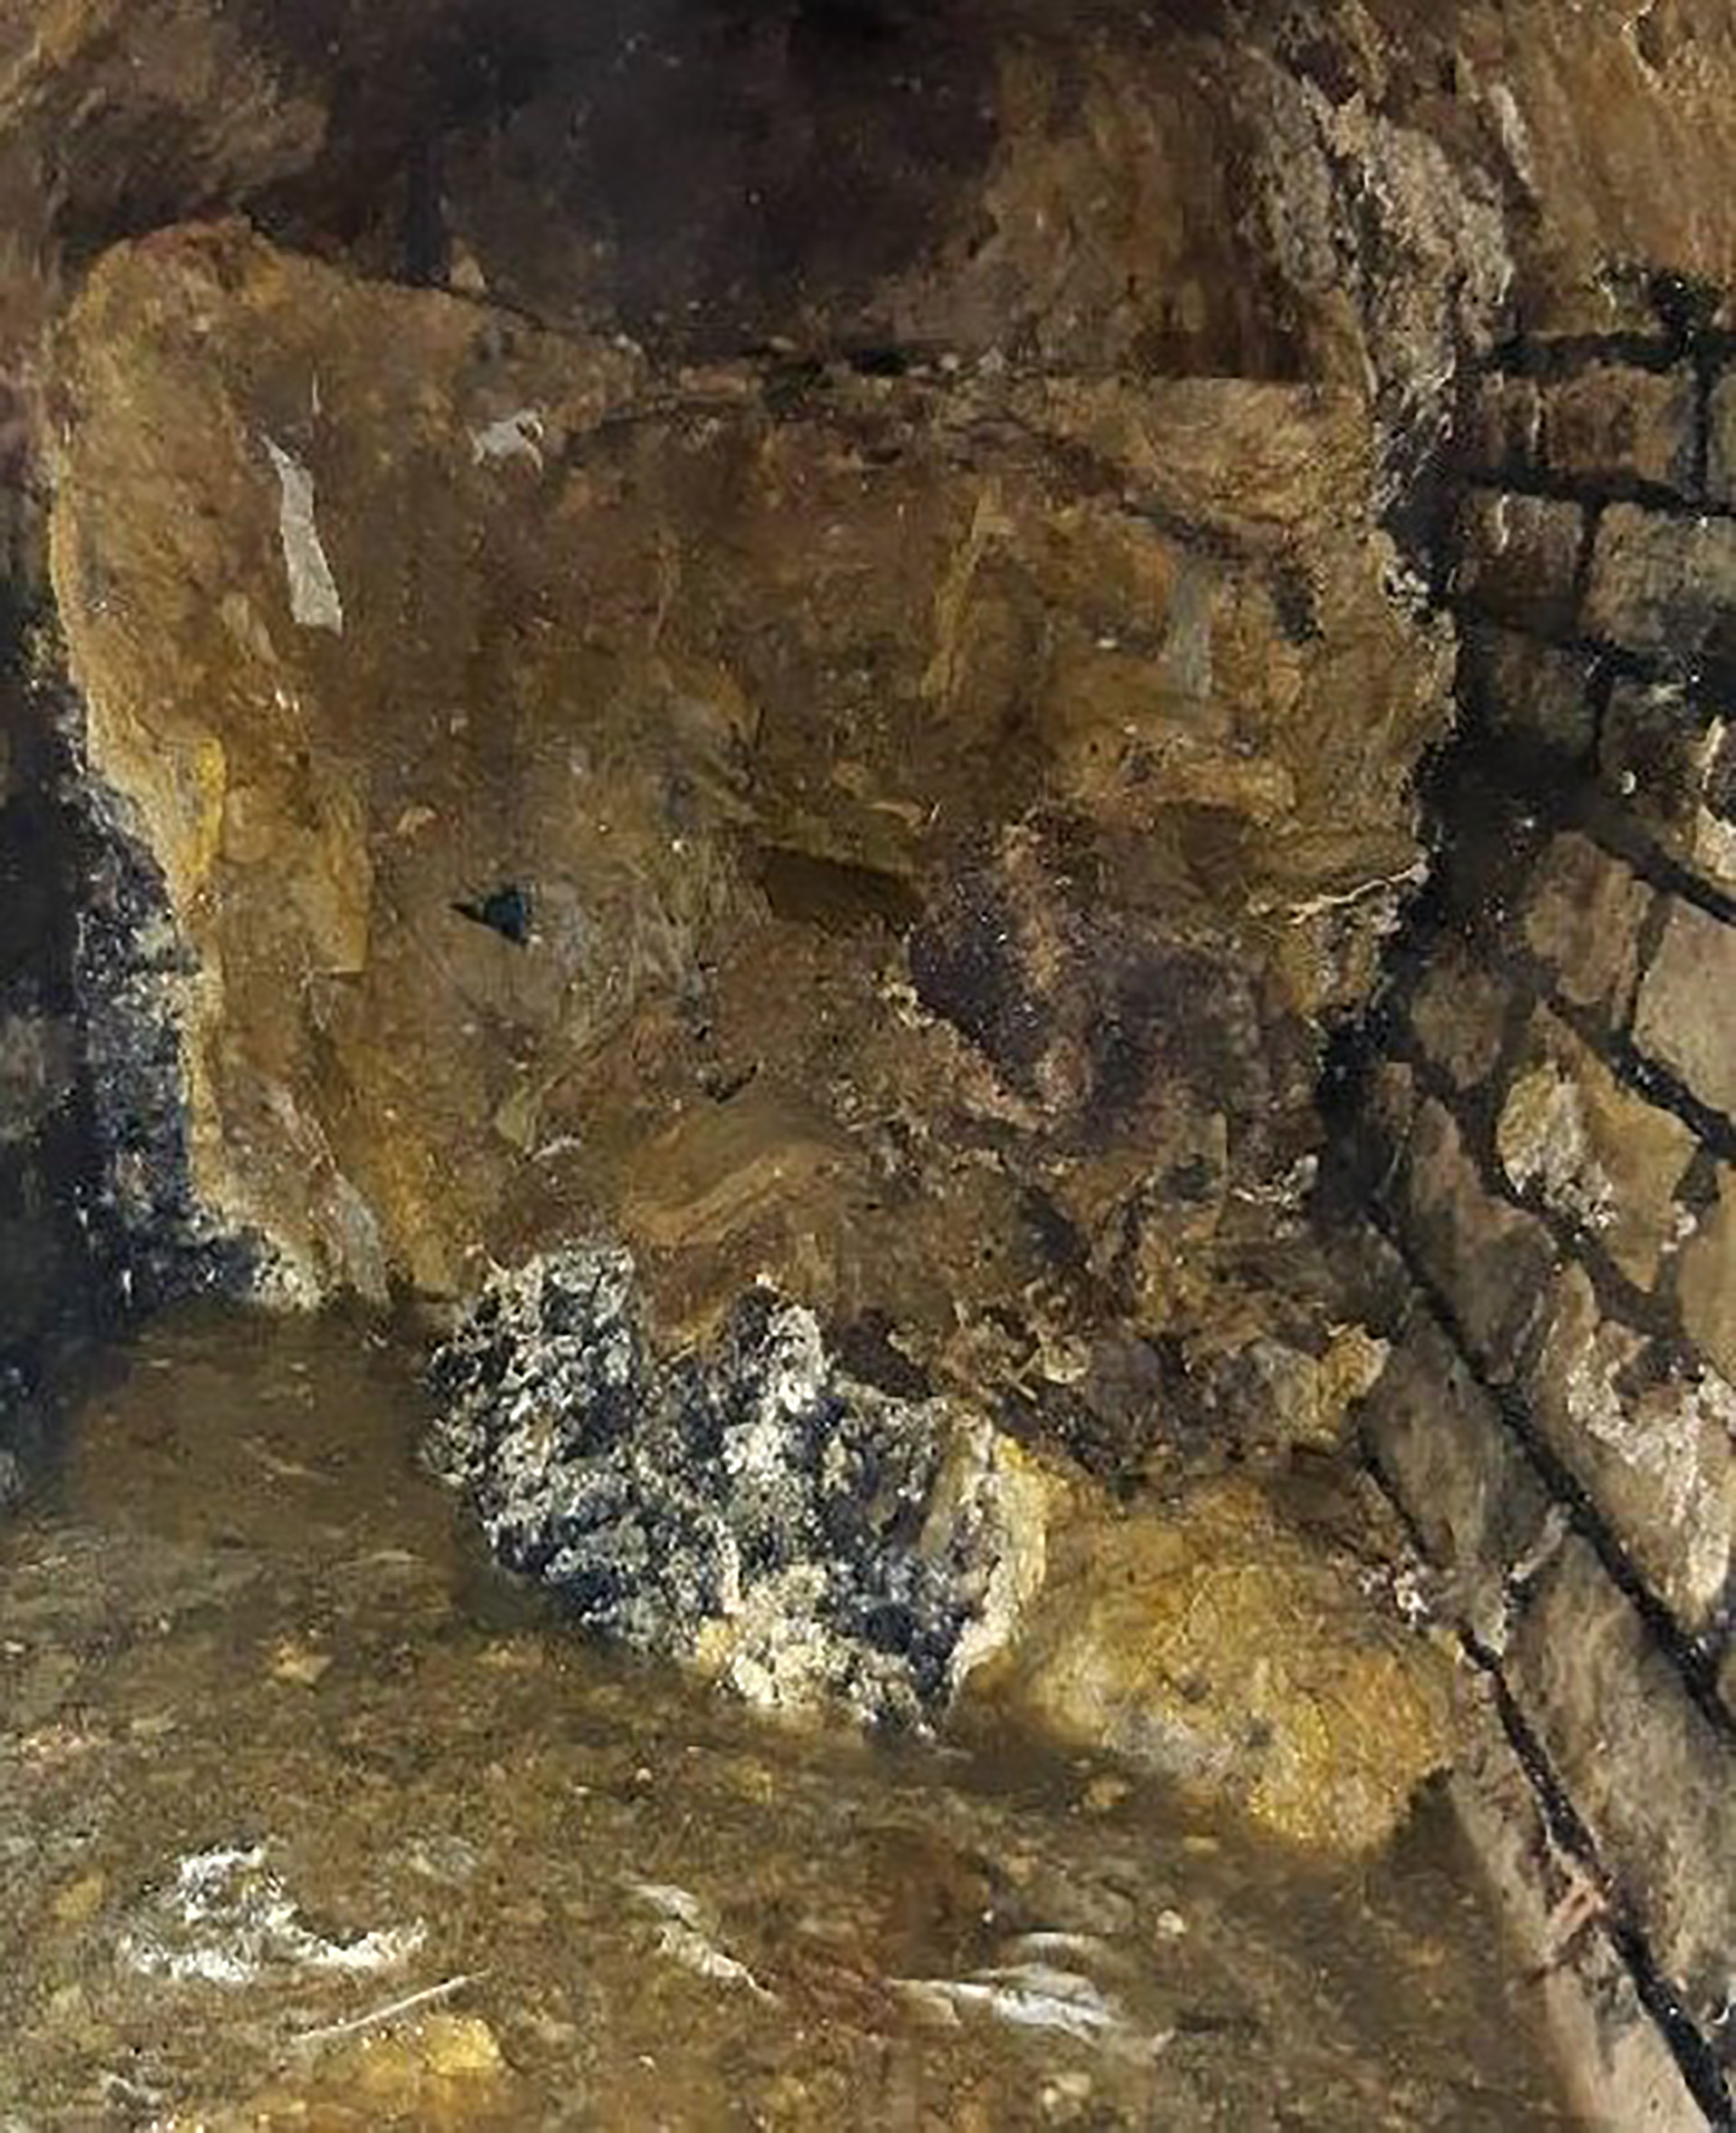 A 'fatberg' weighing more than an African elephant in a central London trunk sewer. The disgusting 10-tonne mass of fat, grease and other “unflushable” items like wet wipes was hauled out from the sewer in Cadogan Place, Belgravia.